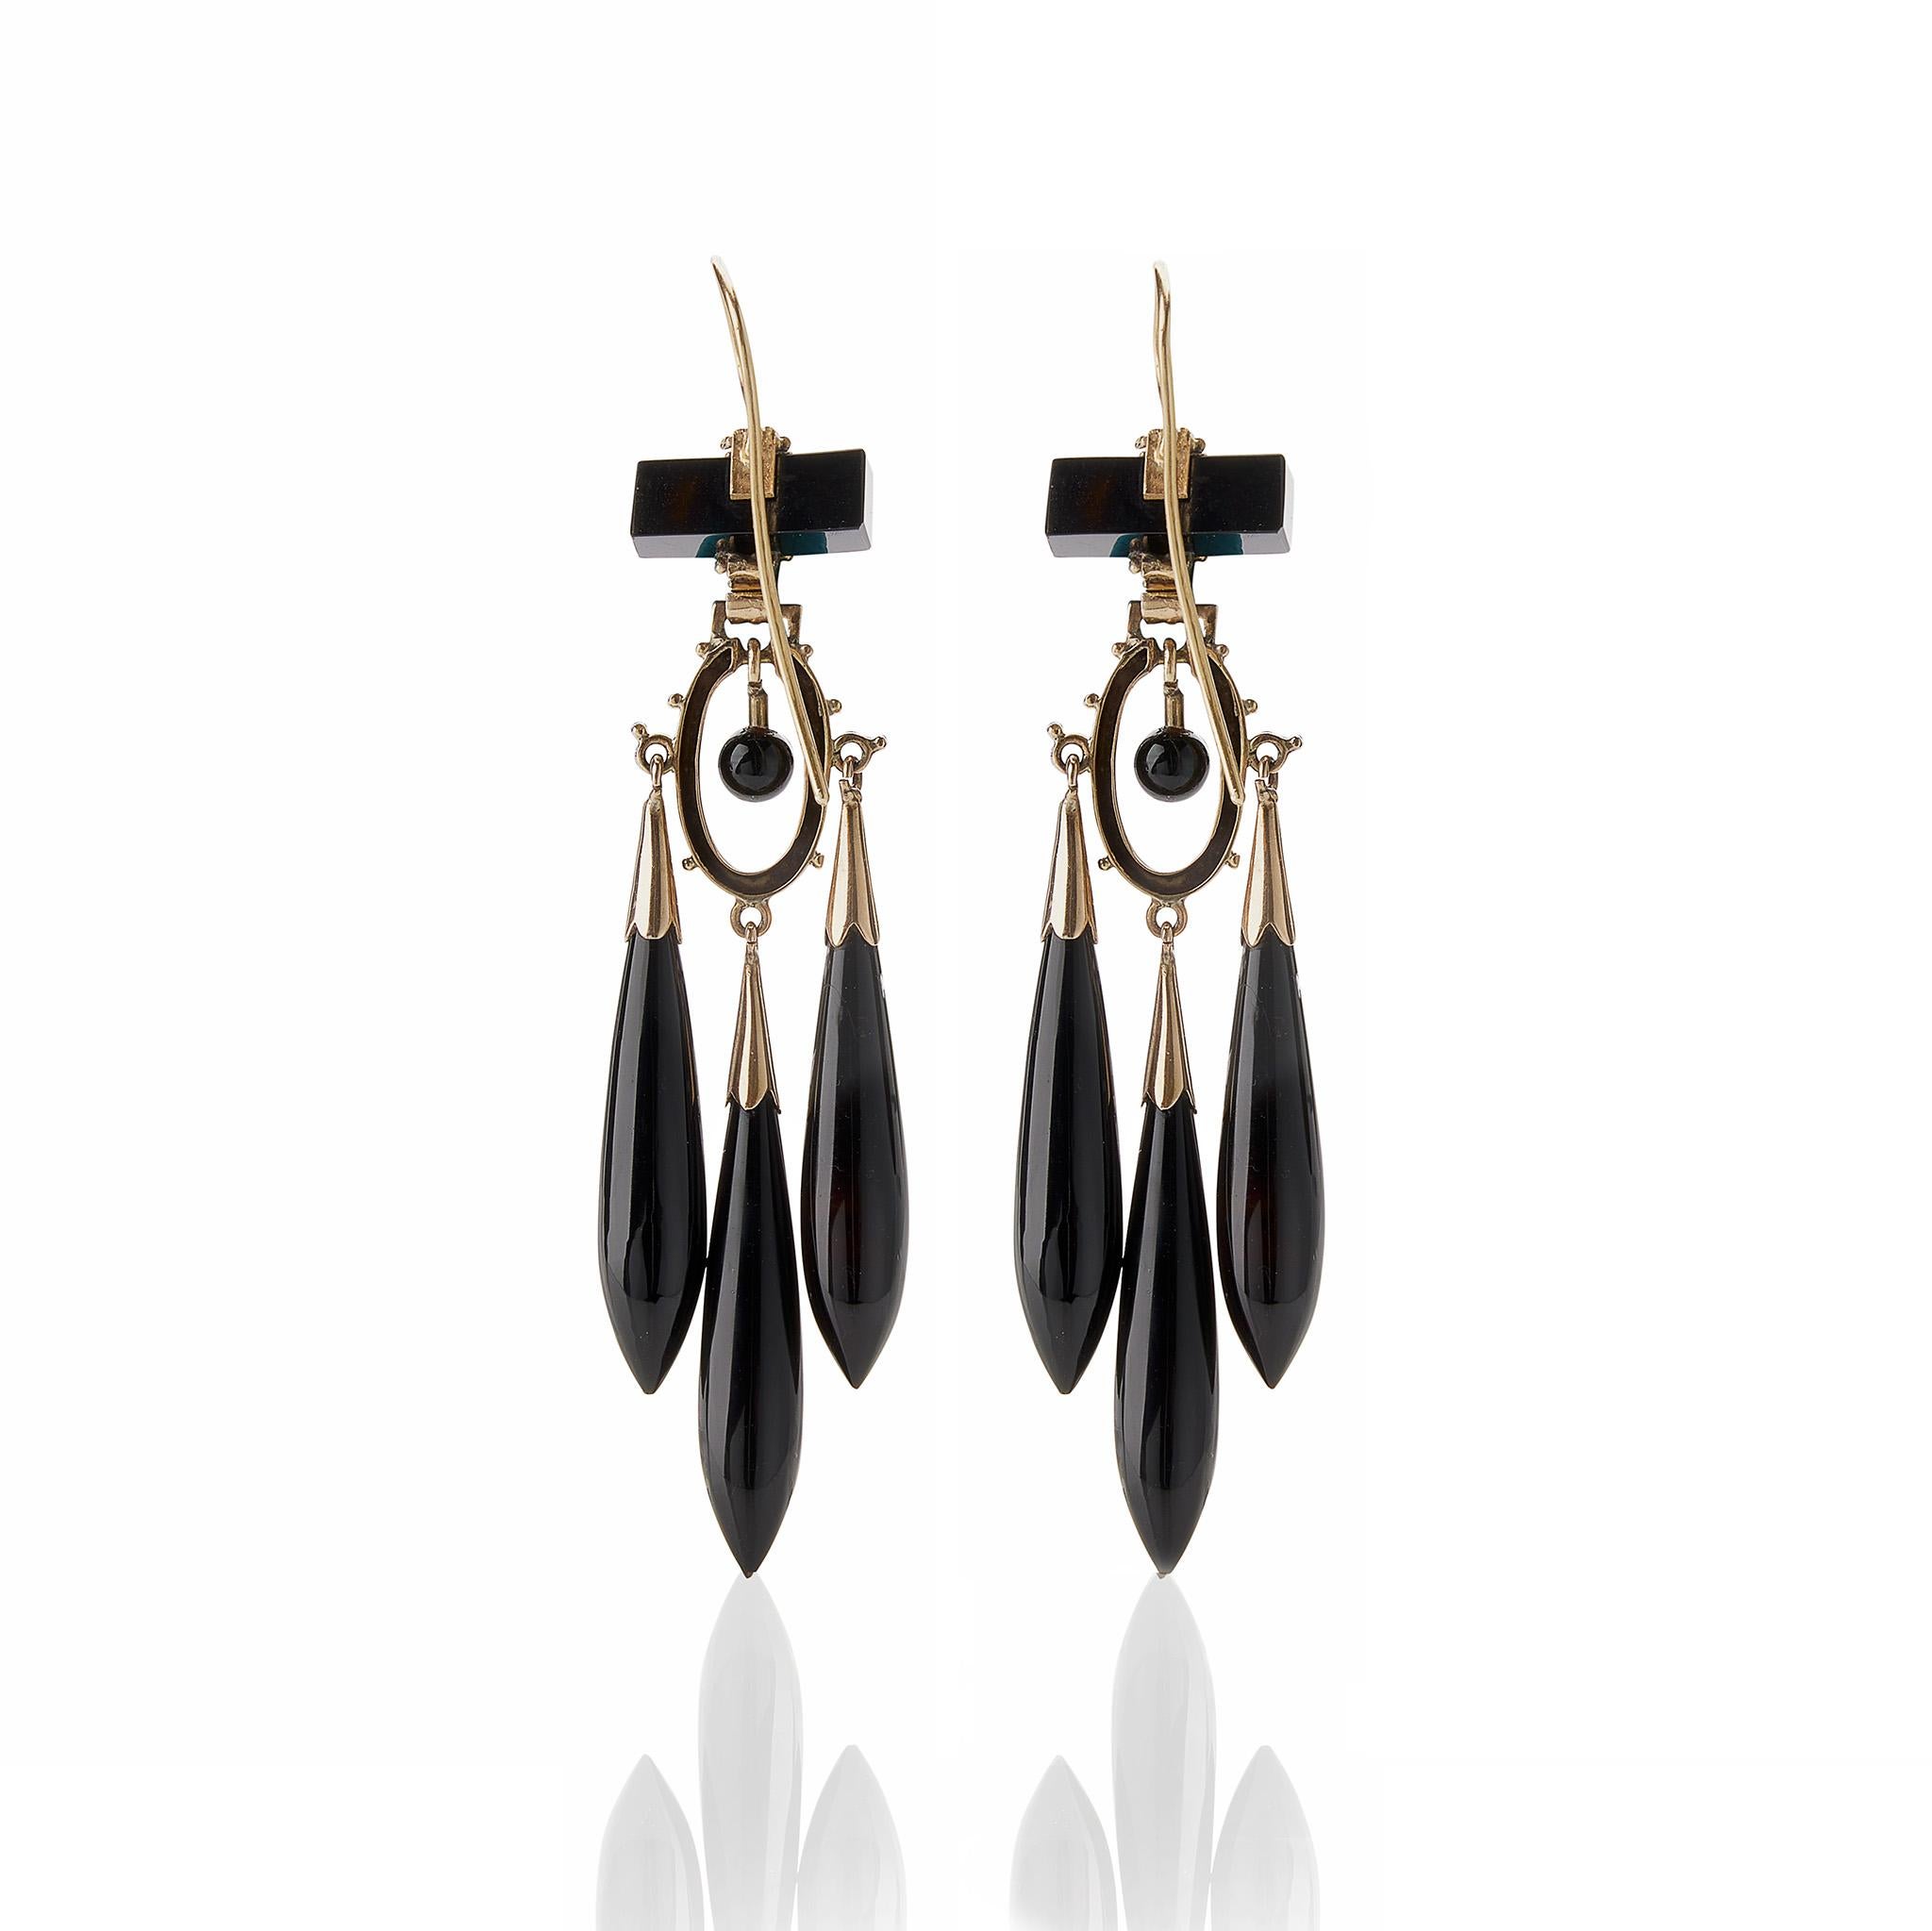 Composed of onyx, enamel and 14K gold, these antique pendant earrings were created around 1870. Each is designed as an onyx bar suspending a cascade of flexibly-set sphere, black enamel oval element and three tapering onyx drops with shaped enamel